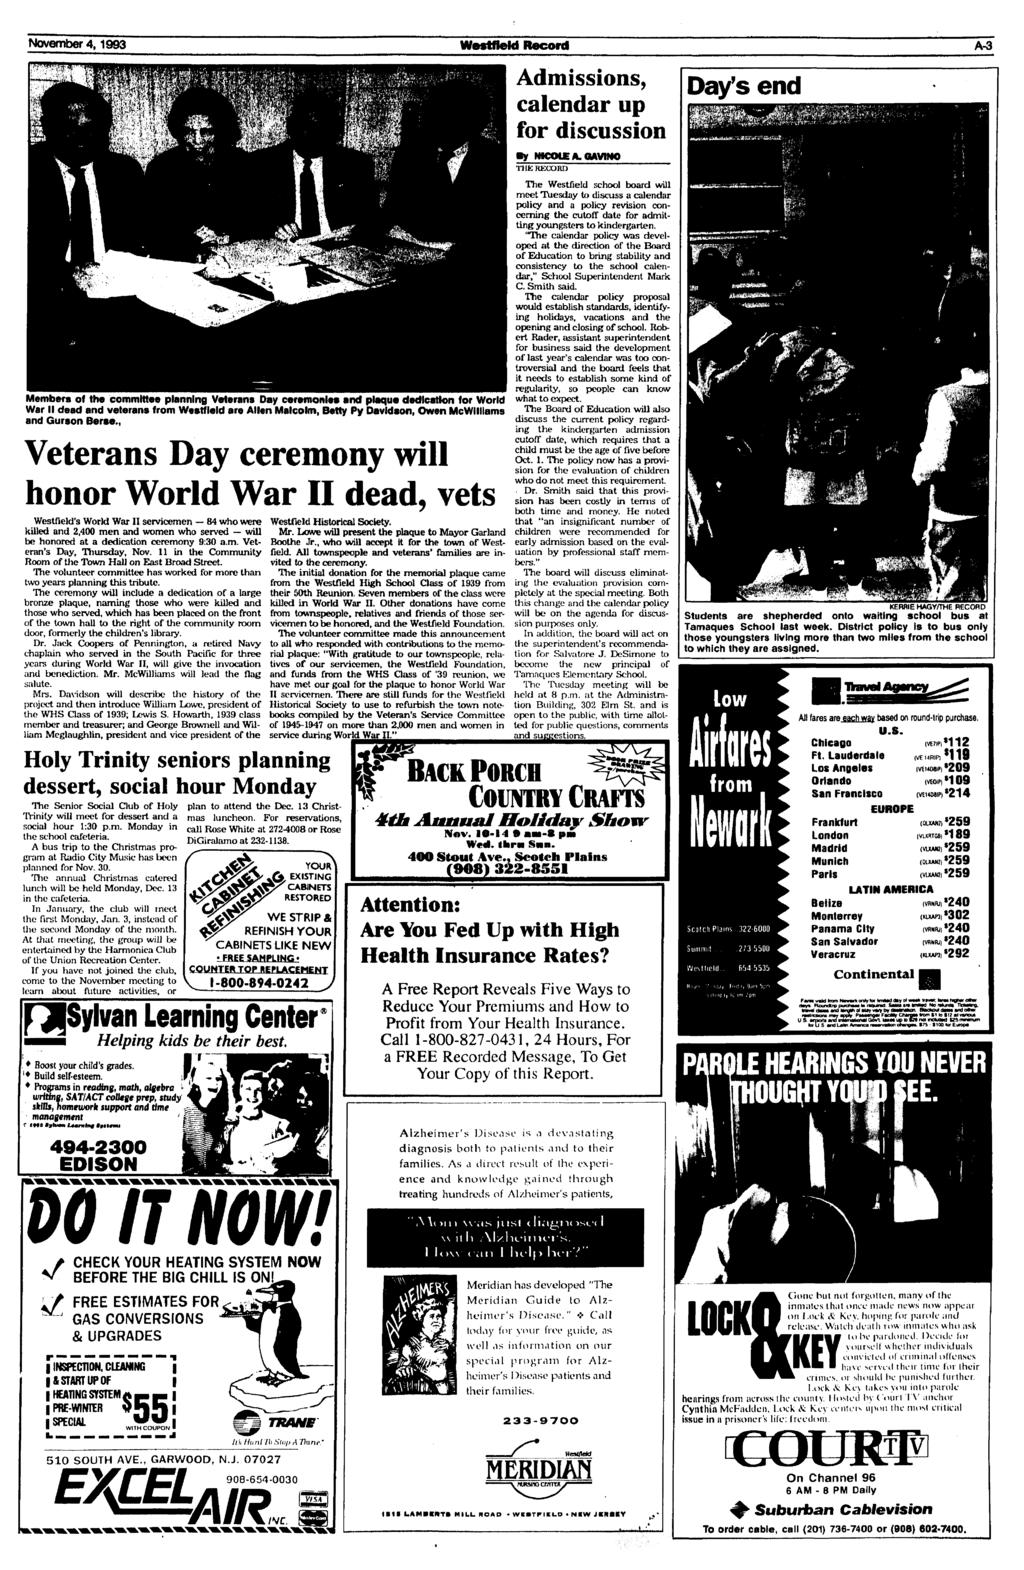 November 4,1993 WestfleM Record A-3 Members of the committee planning Veterans Day ceremonies and plaque dedication for World War II dead and veterans from Westfleld are Allen Malcolm, Betty Py